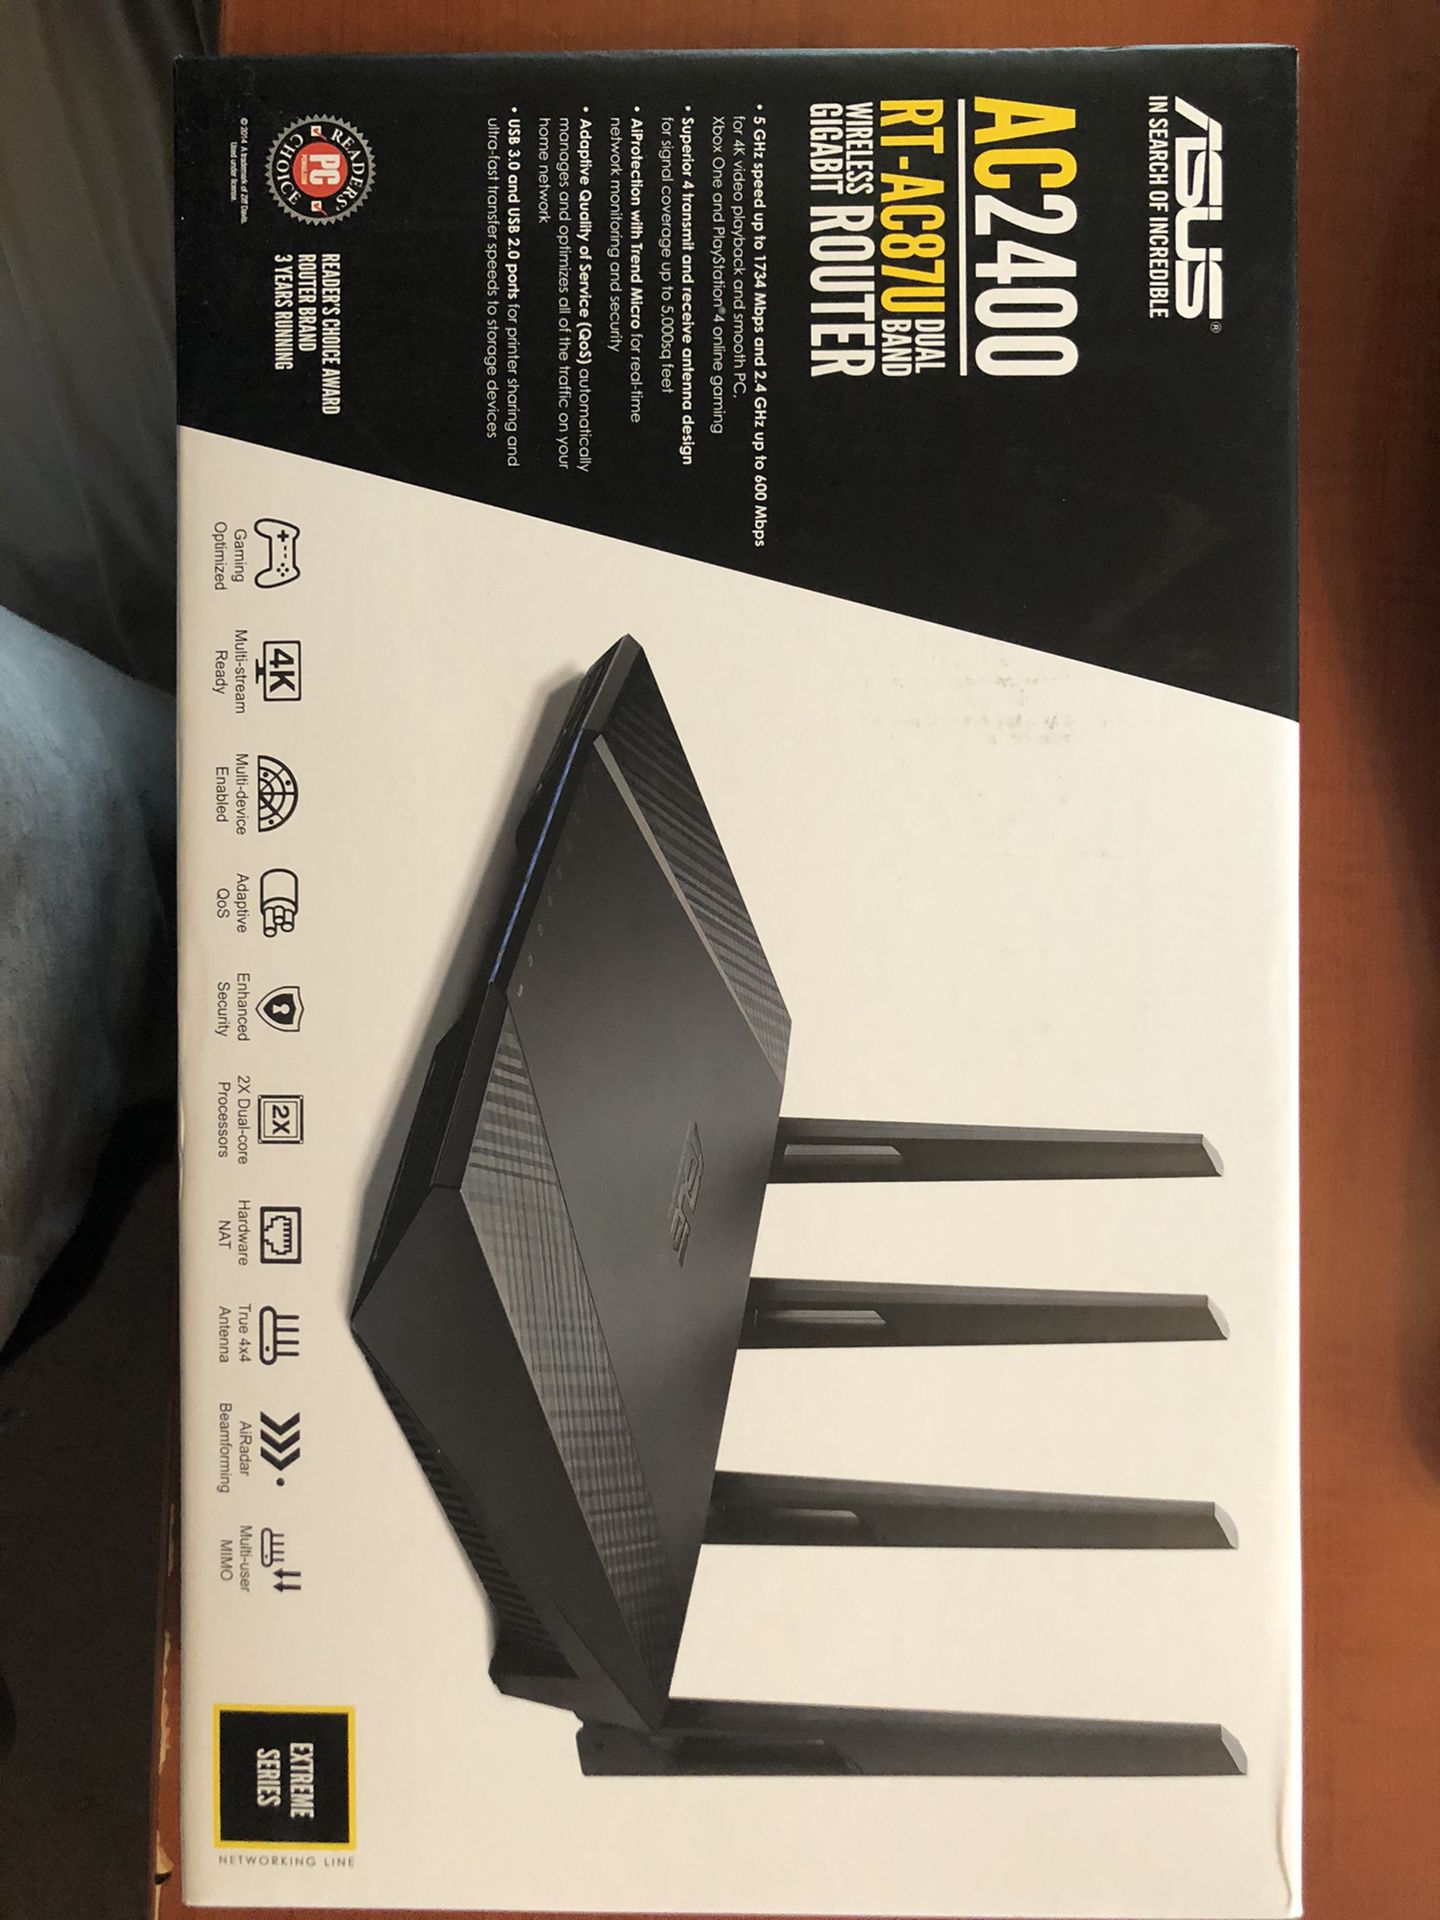 ASUS Extreme Series AC2400 Wireless Gigabit Router